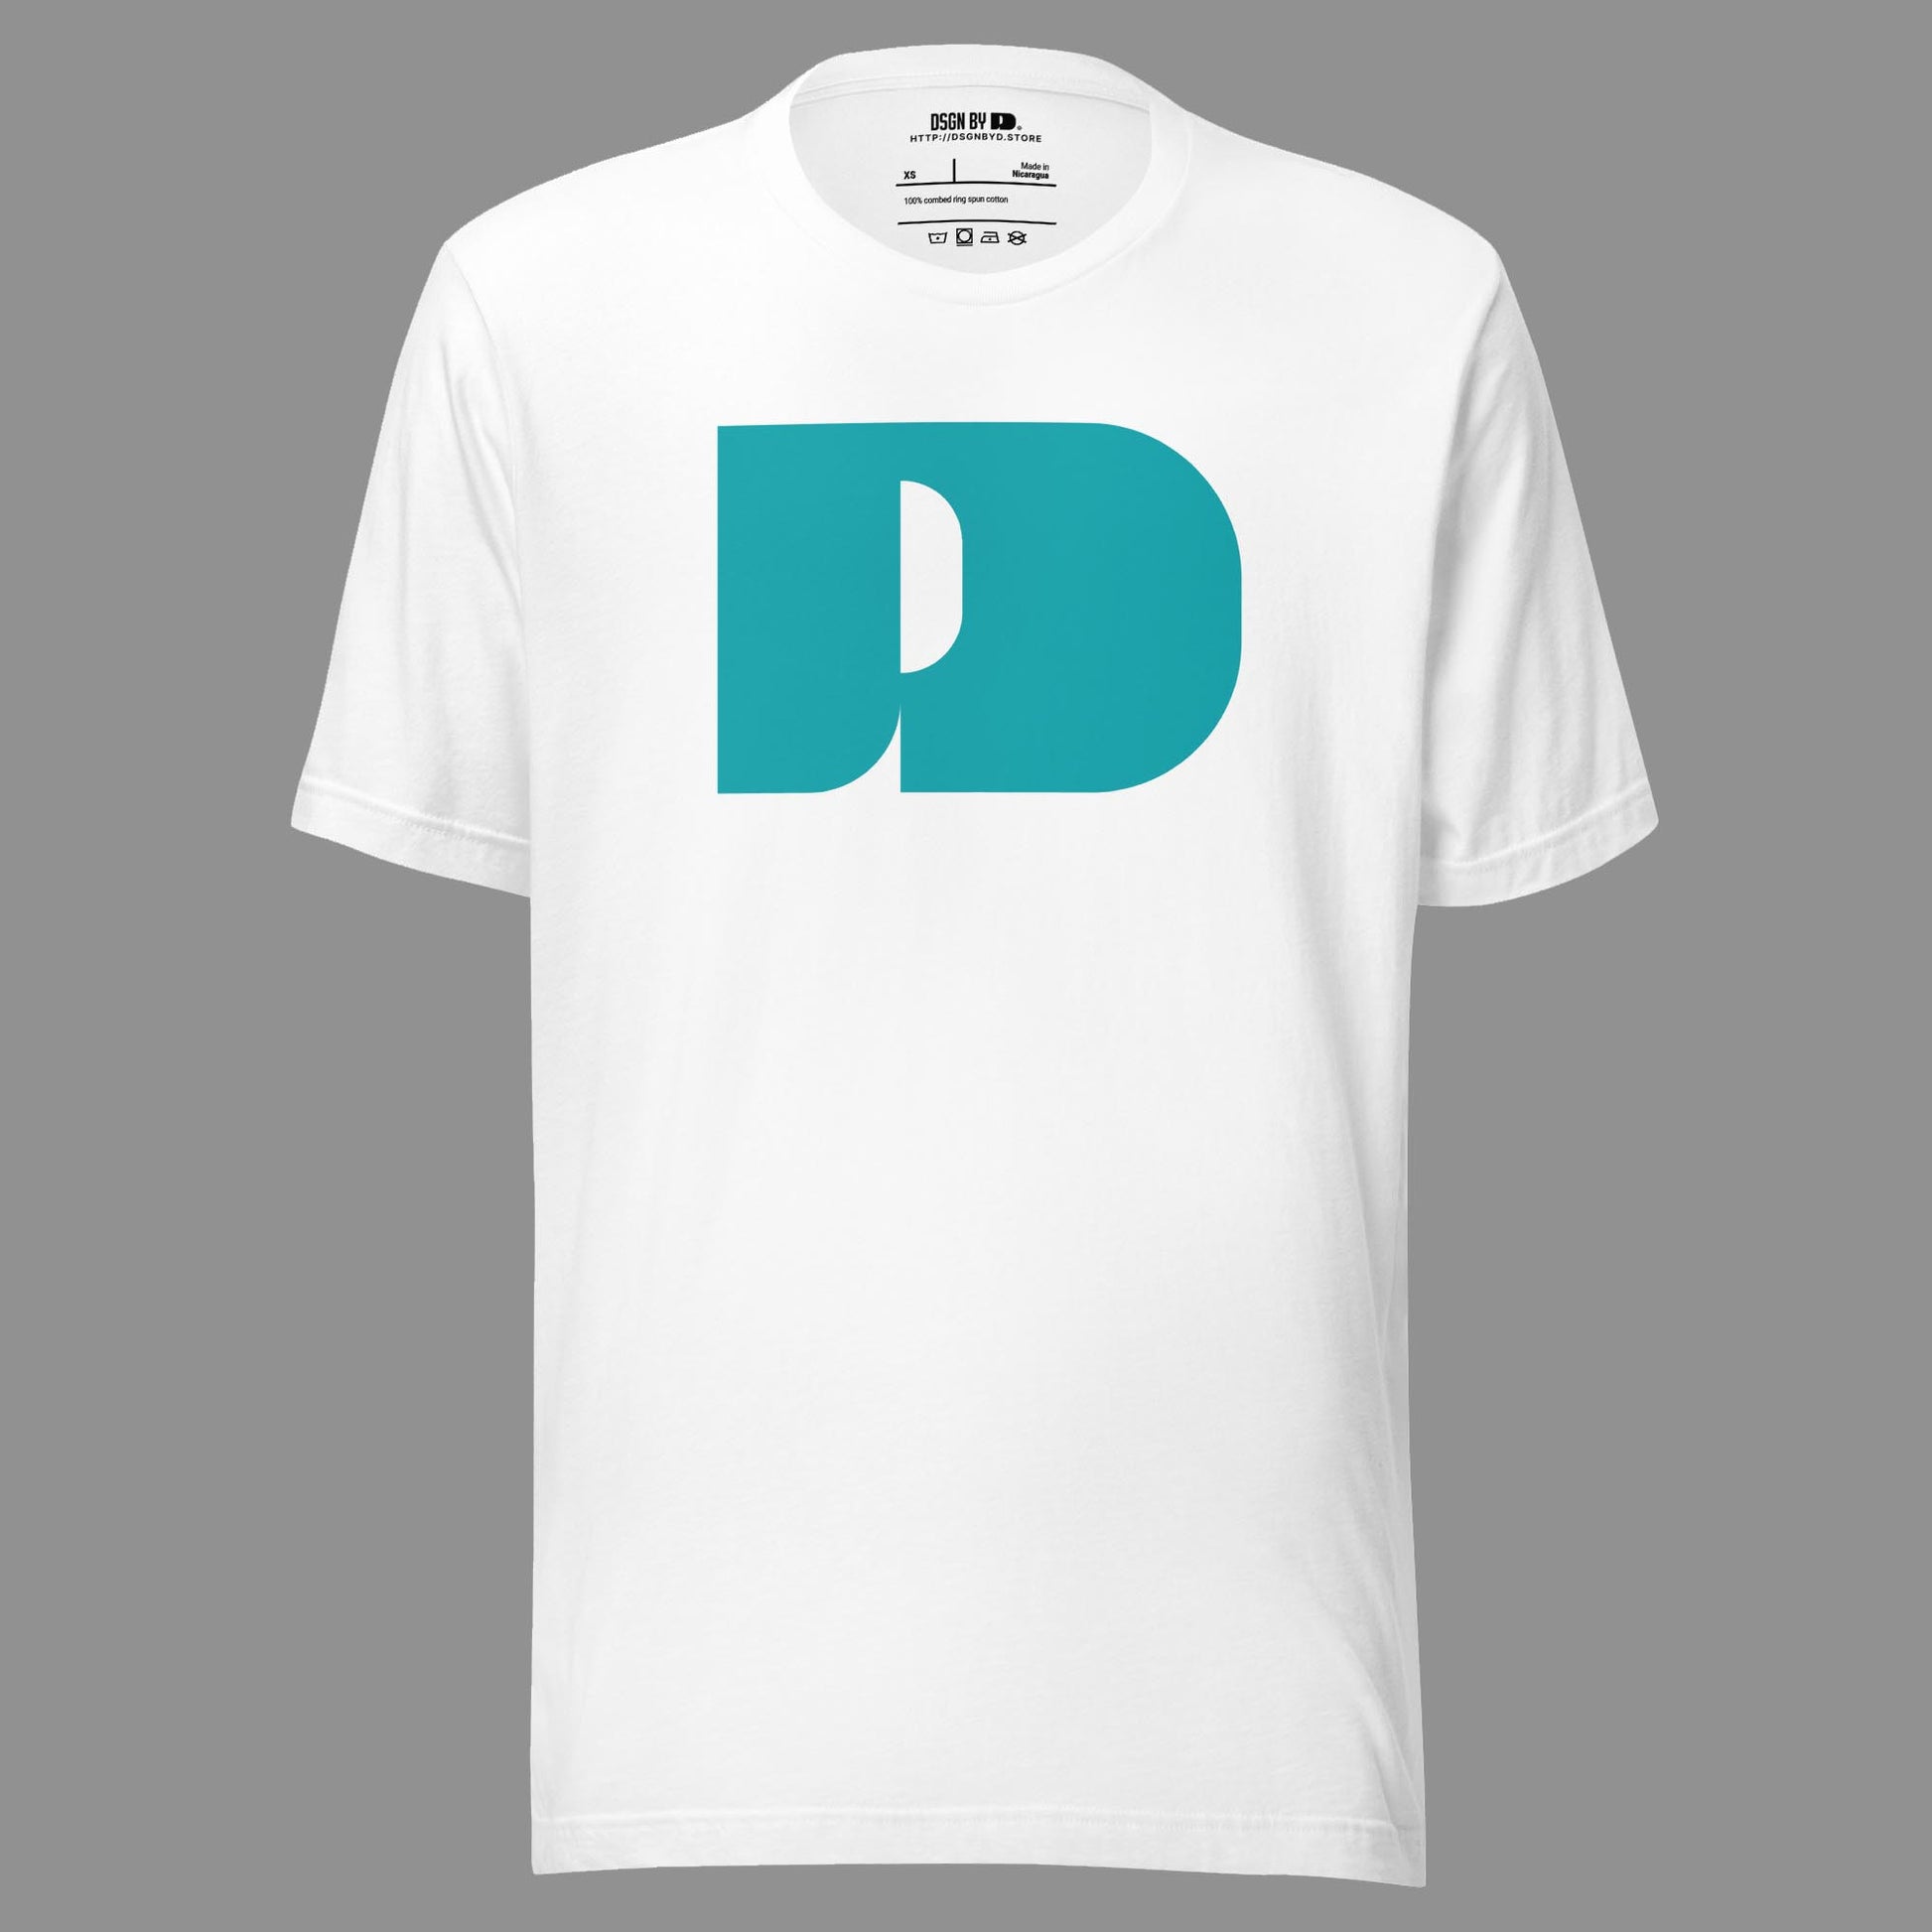 A white cotton unisex graphic tee with letter D .